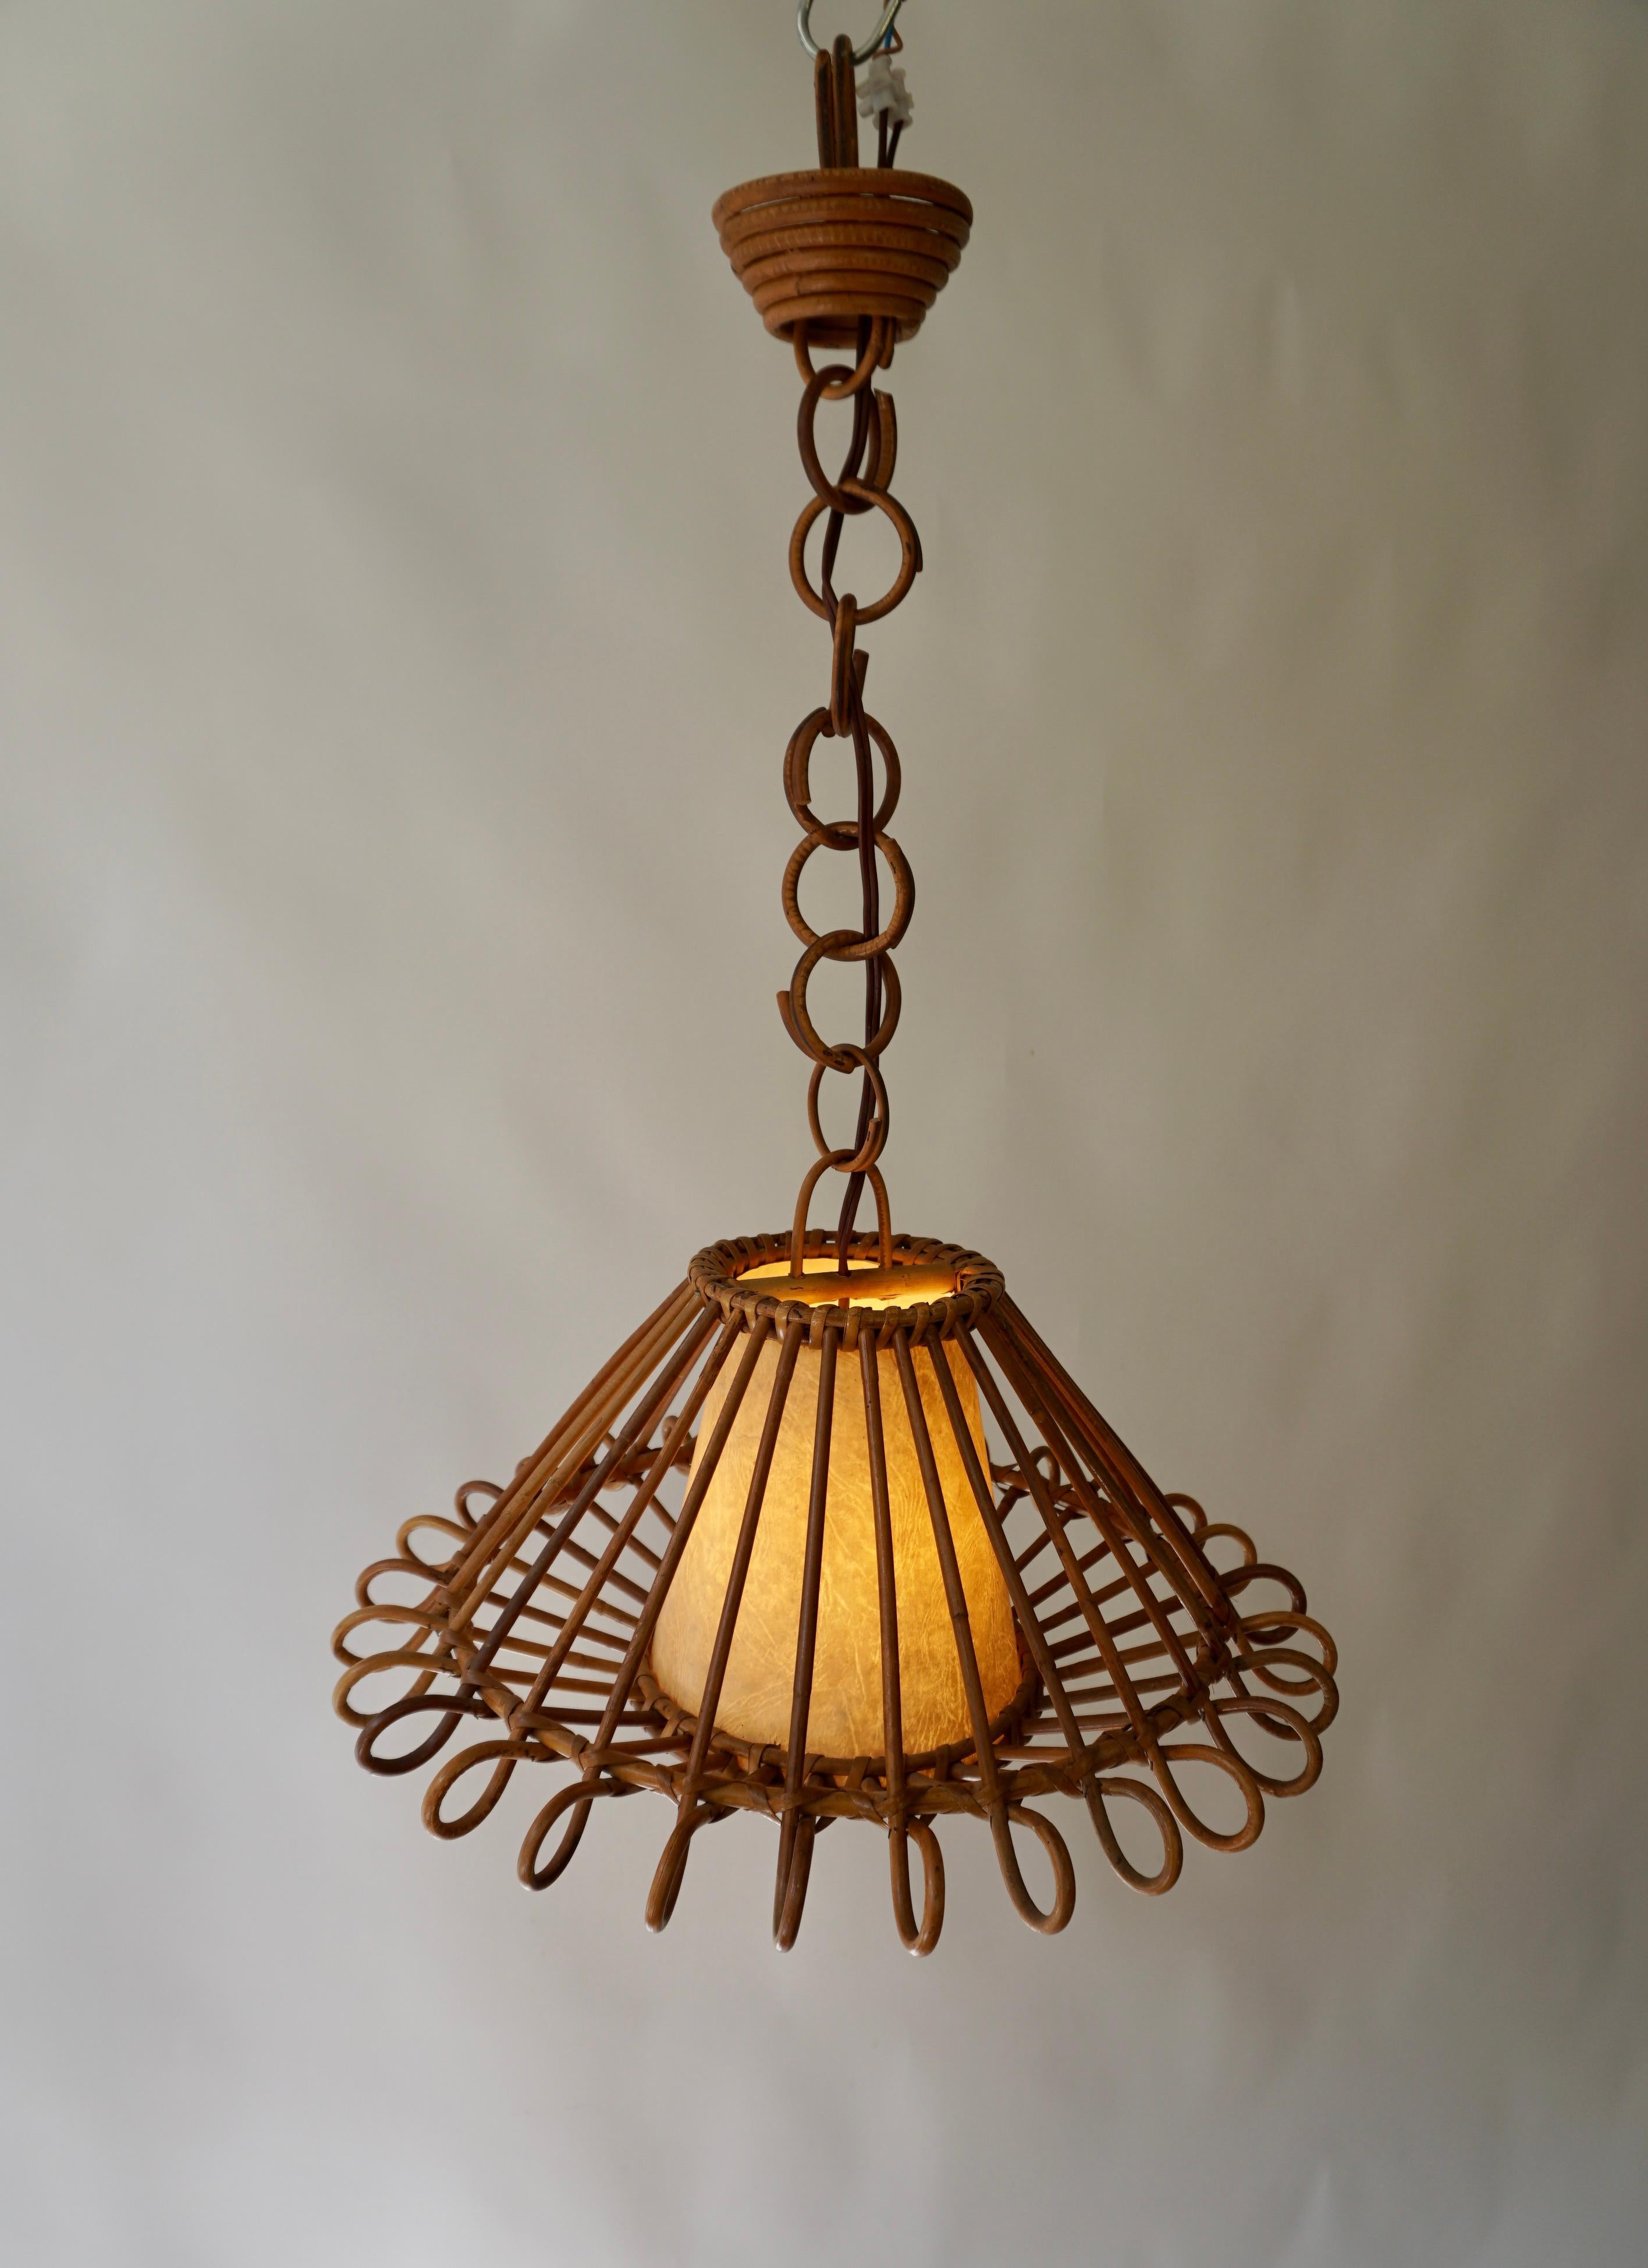 Hand-Crafted French Pendant Light or Lantern in Rattan, 1950s For Sale